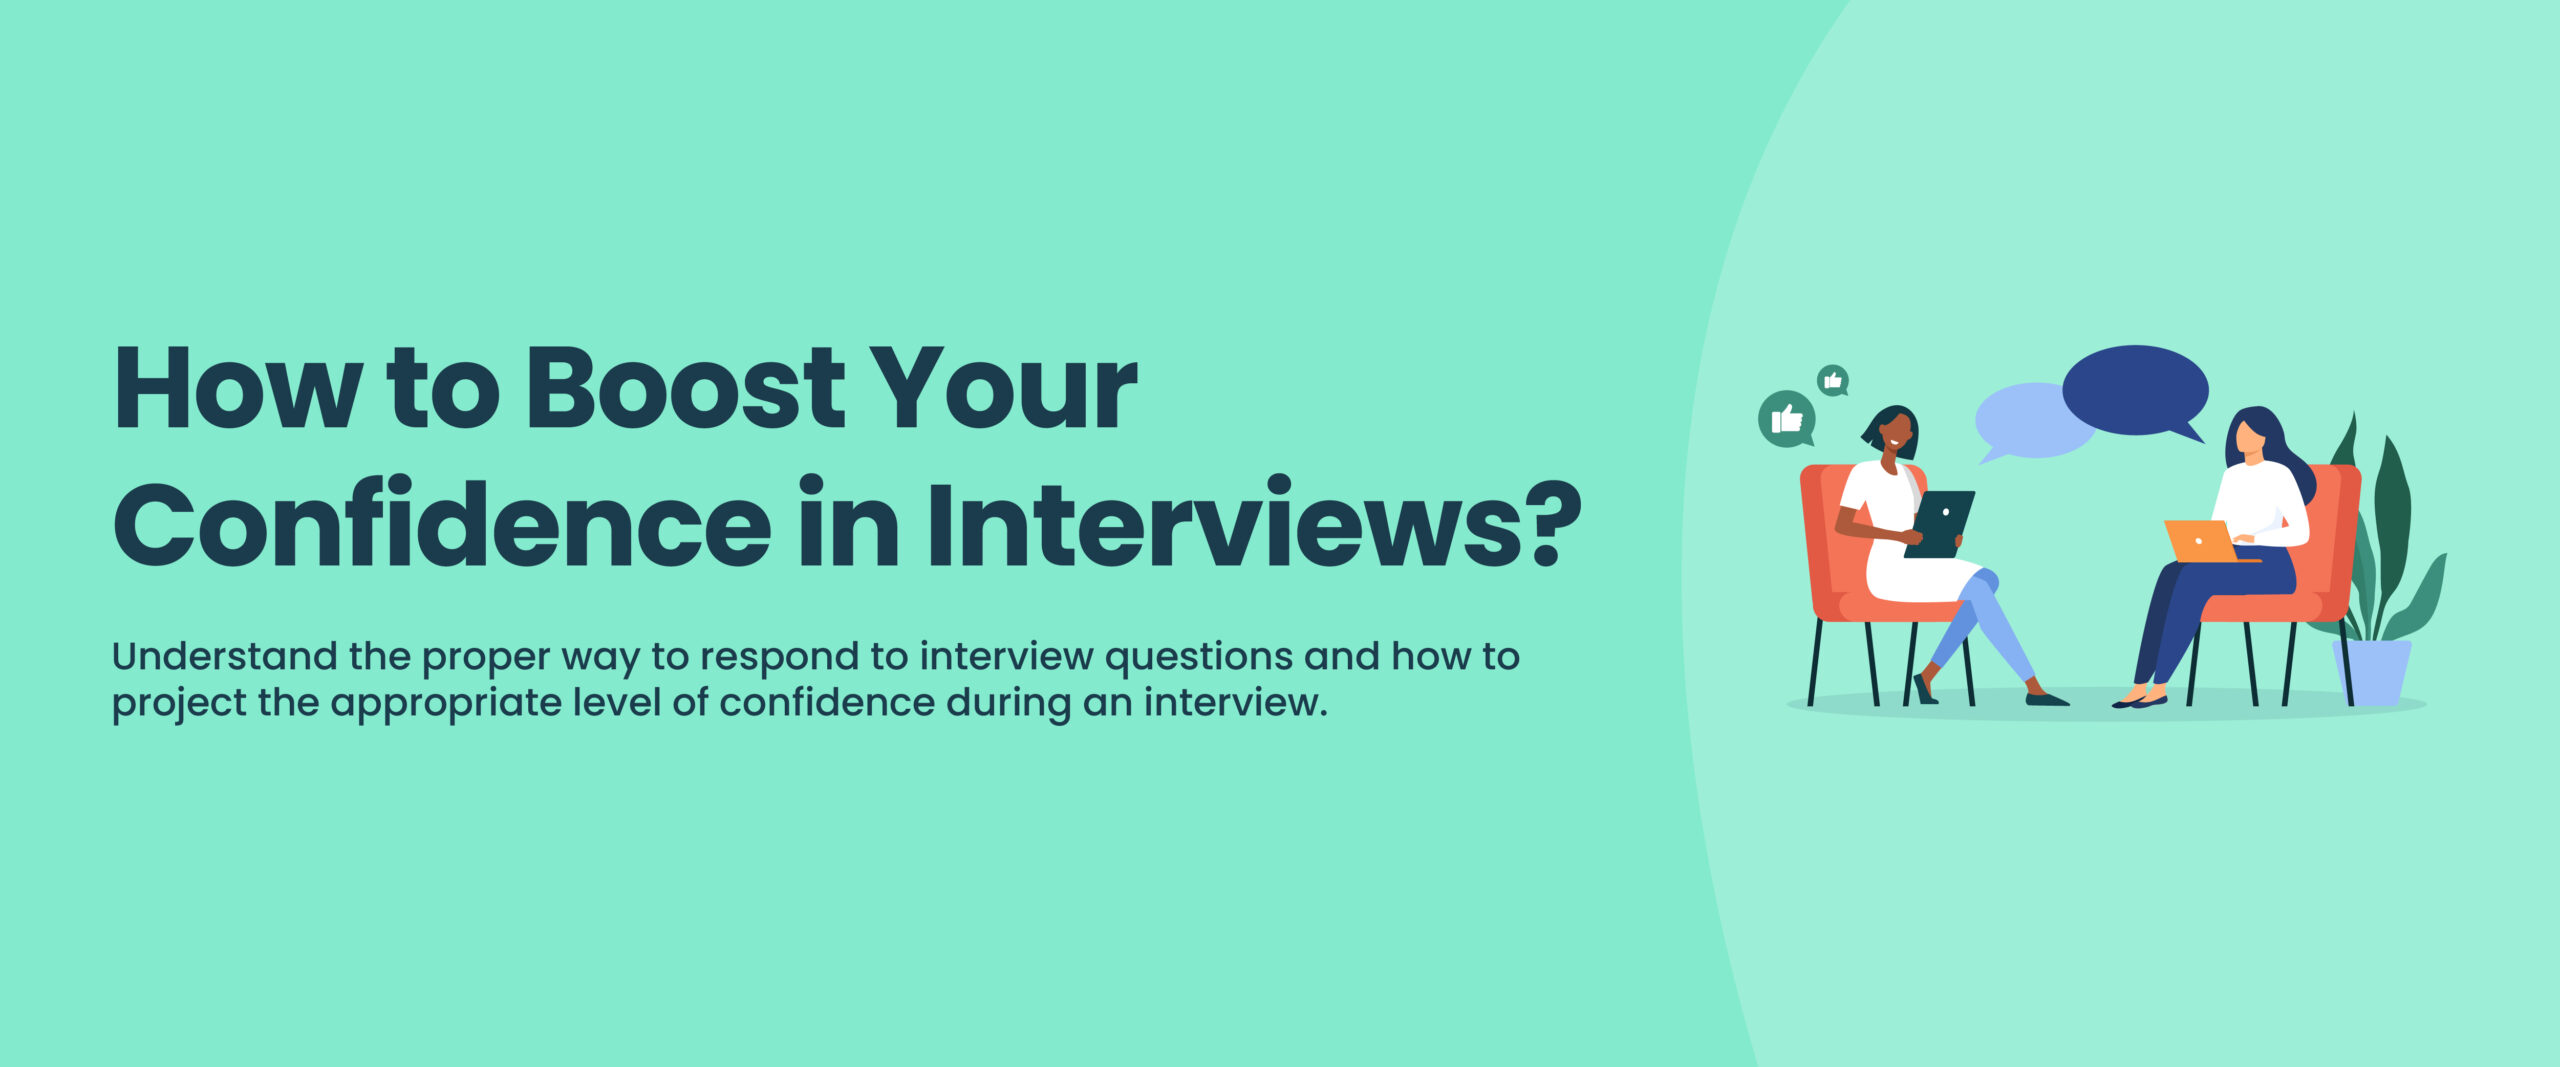 How to Boost Your Confidence in Interviews